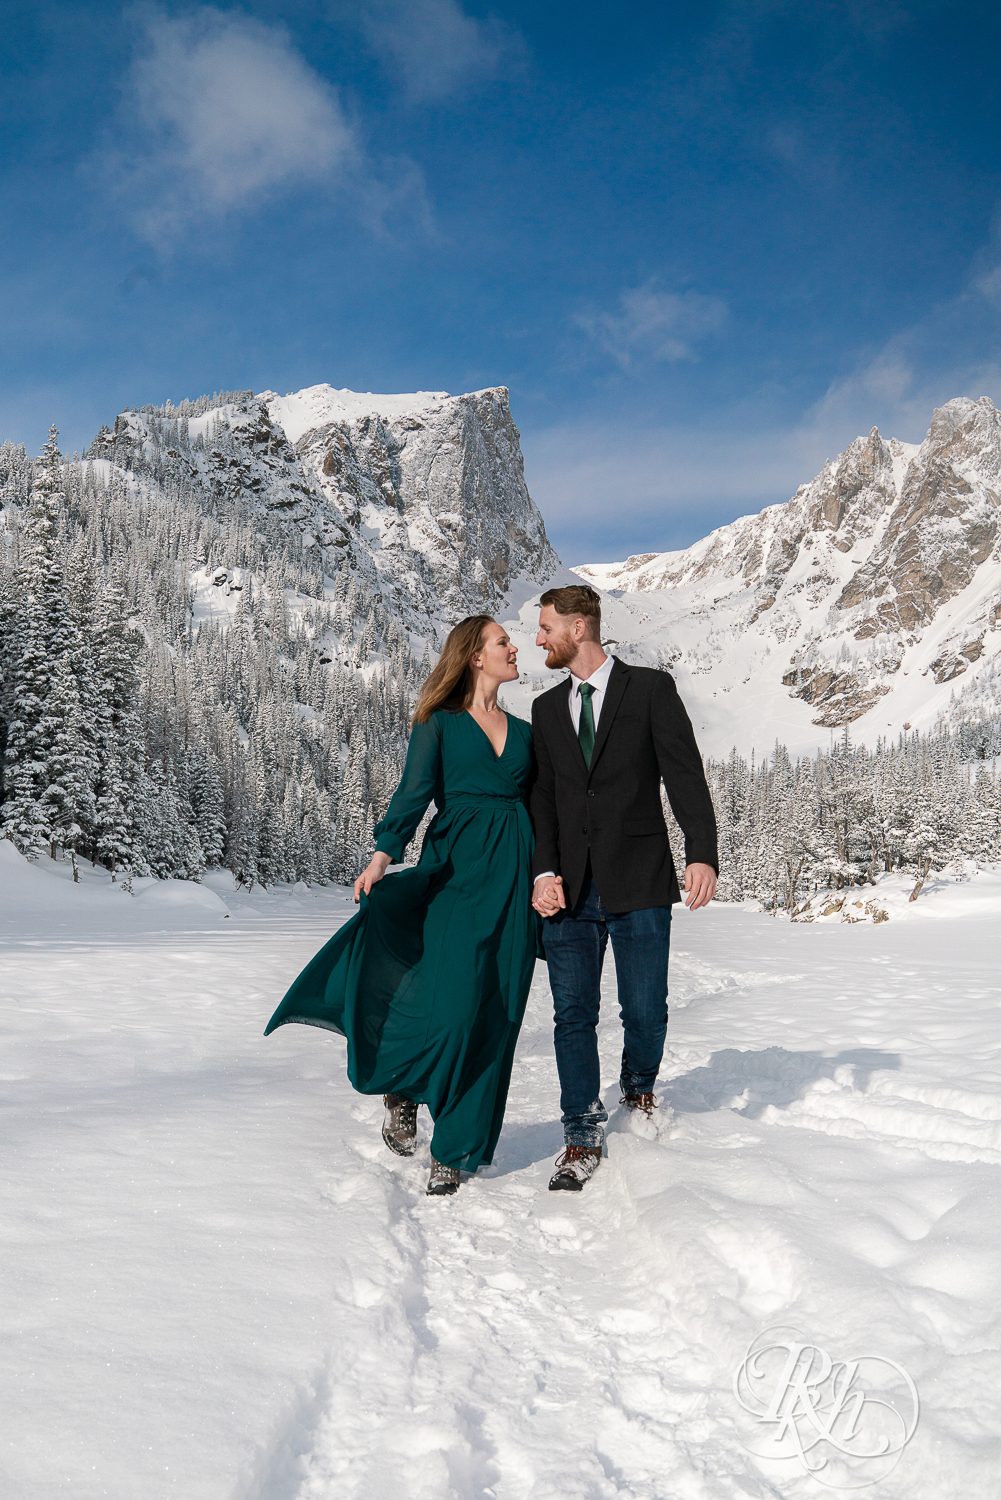 Man in suit and woman in green dress walk in snow on Dream Lake in Rocky Mountain National Park, Colorado.